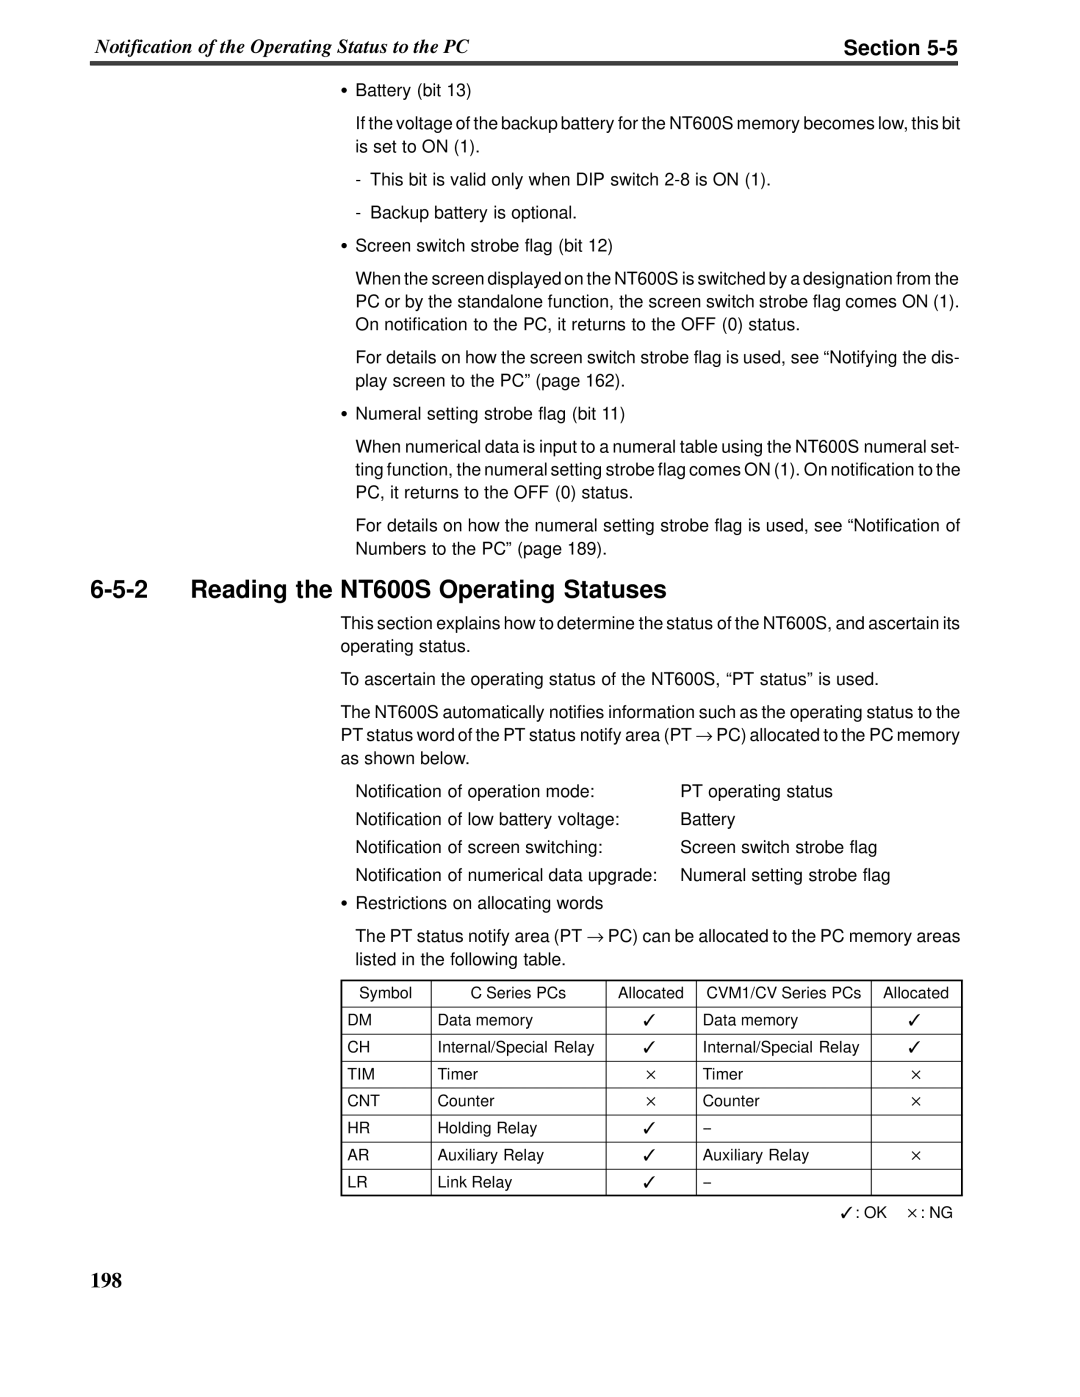 Omron V022-E3-1 operation manual 6-5-2Reading the NT600S Operating Statuses, Section 